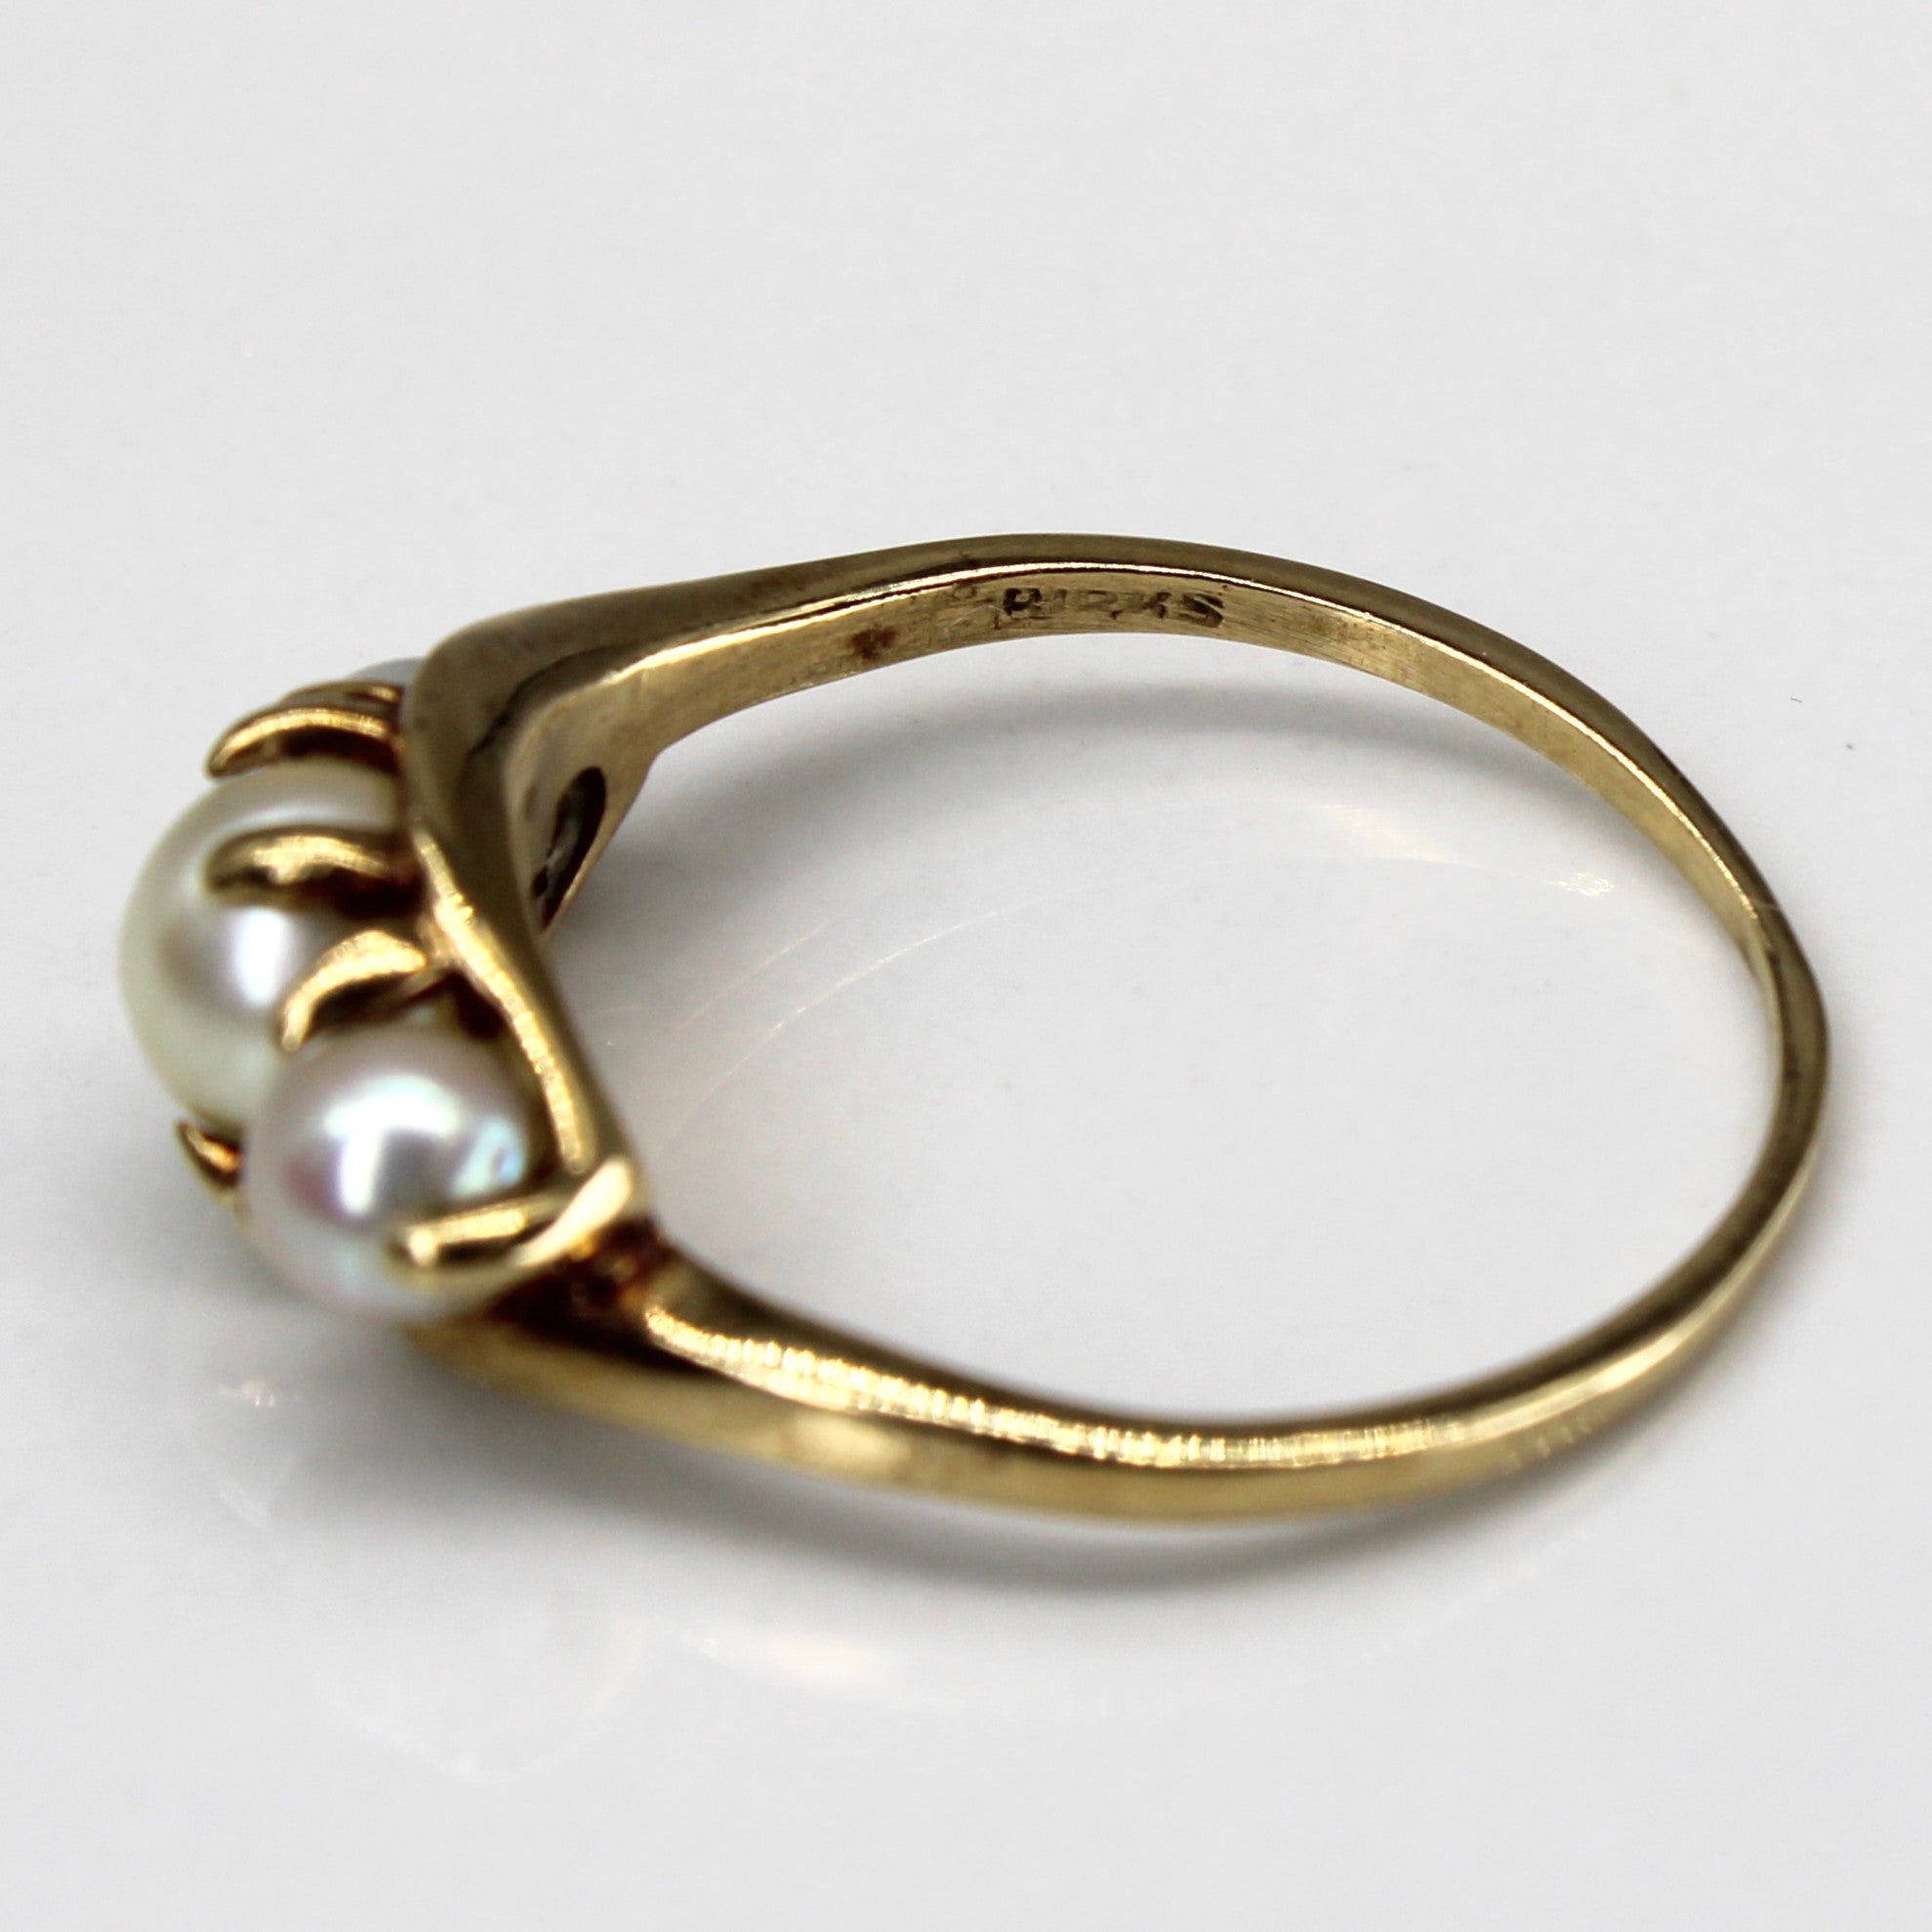 Bypass Three Stone Pearl Ring | SZ 7.75 |